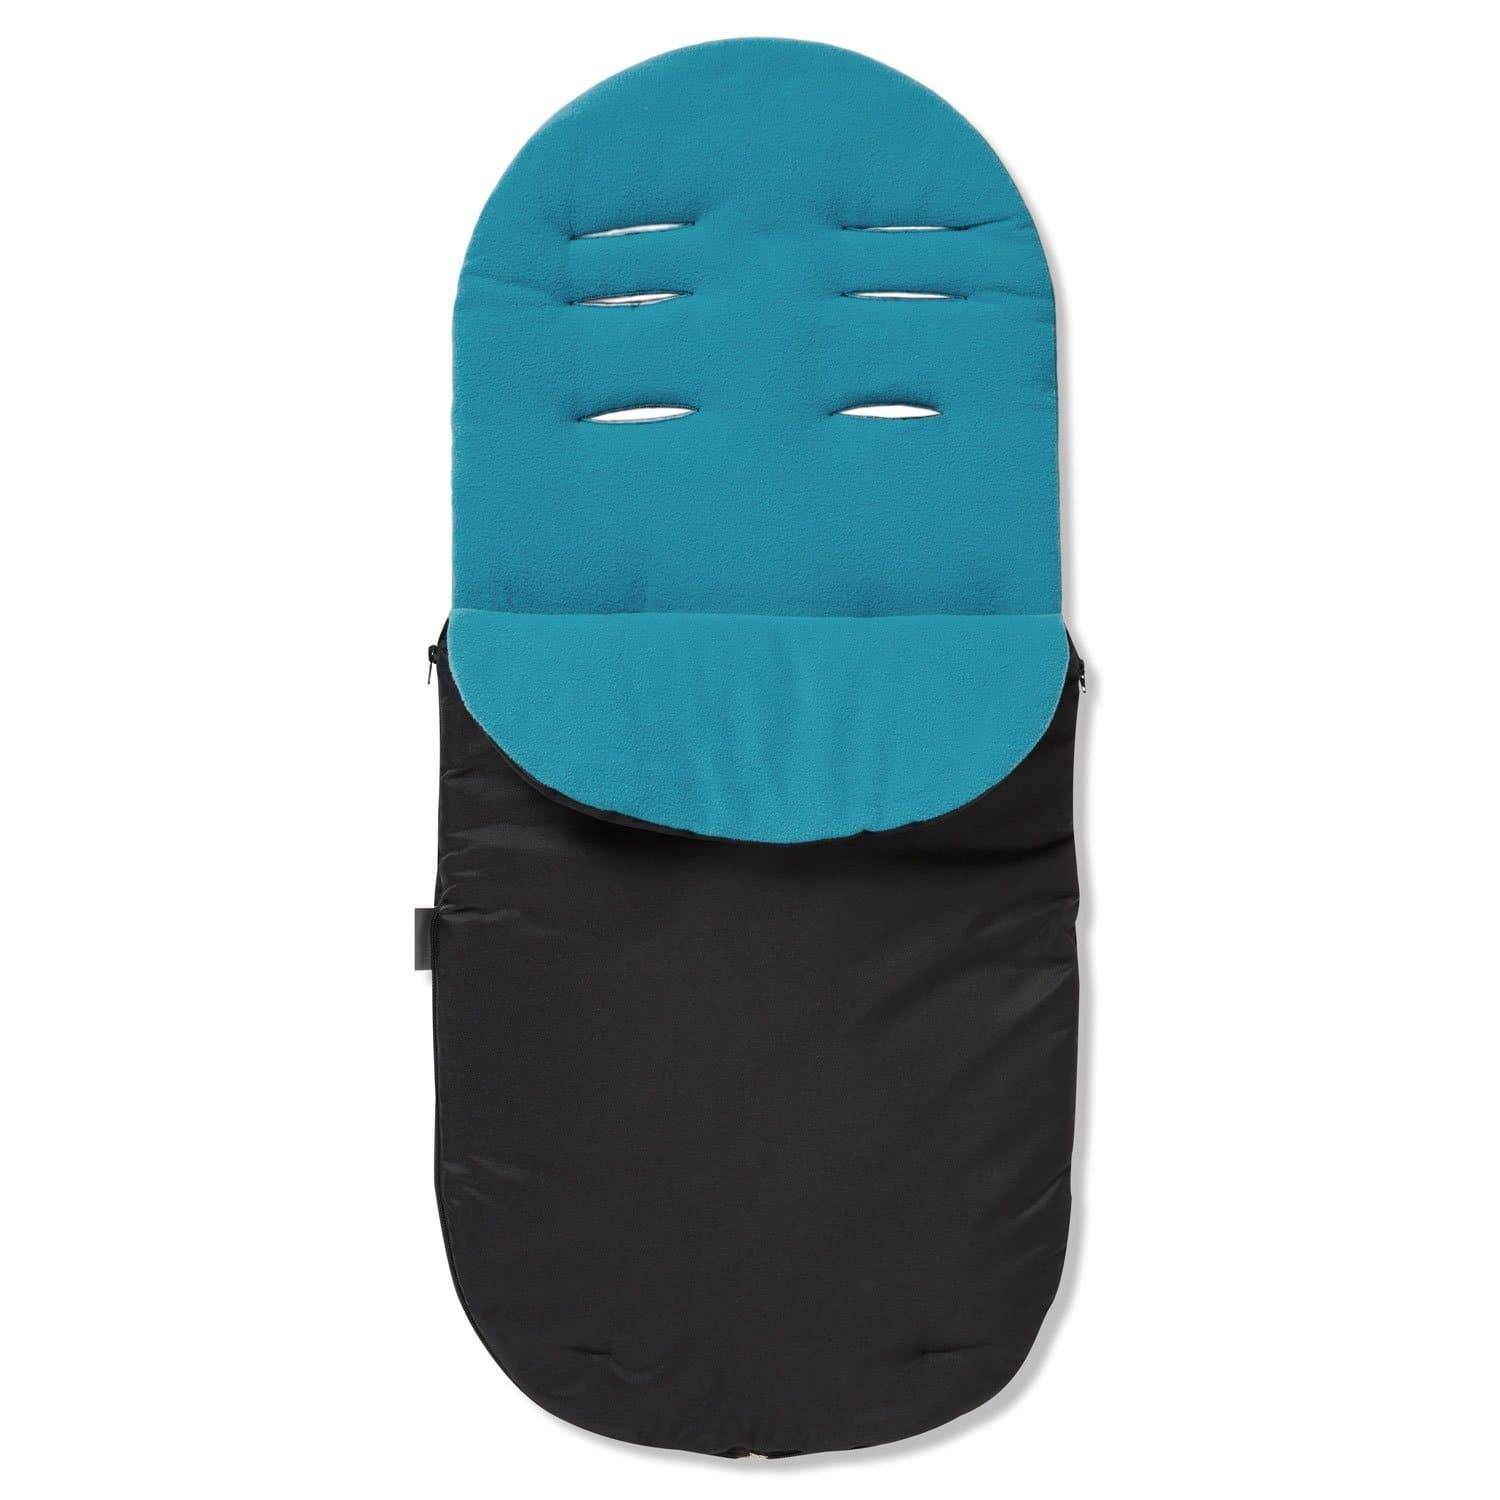 Footmuff / Cosy Toes Compatible with Inglesina - Turquoise / Fits All Models | For Your Little One